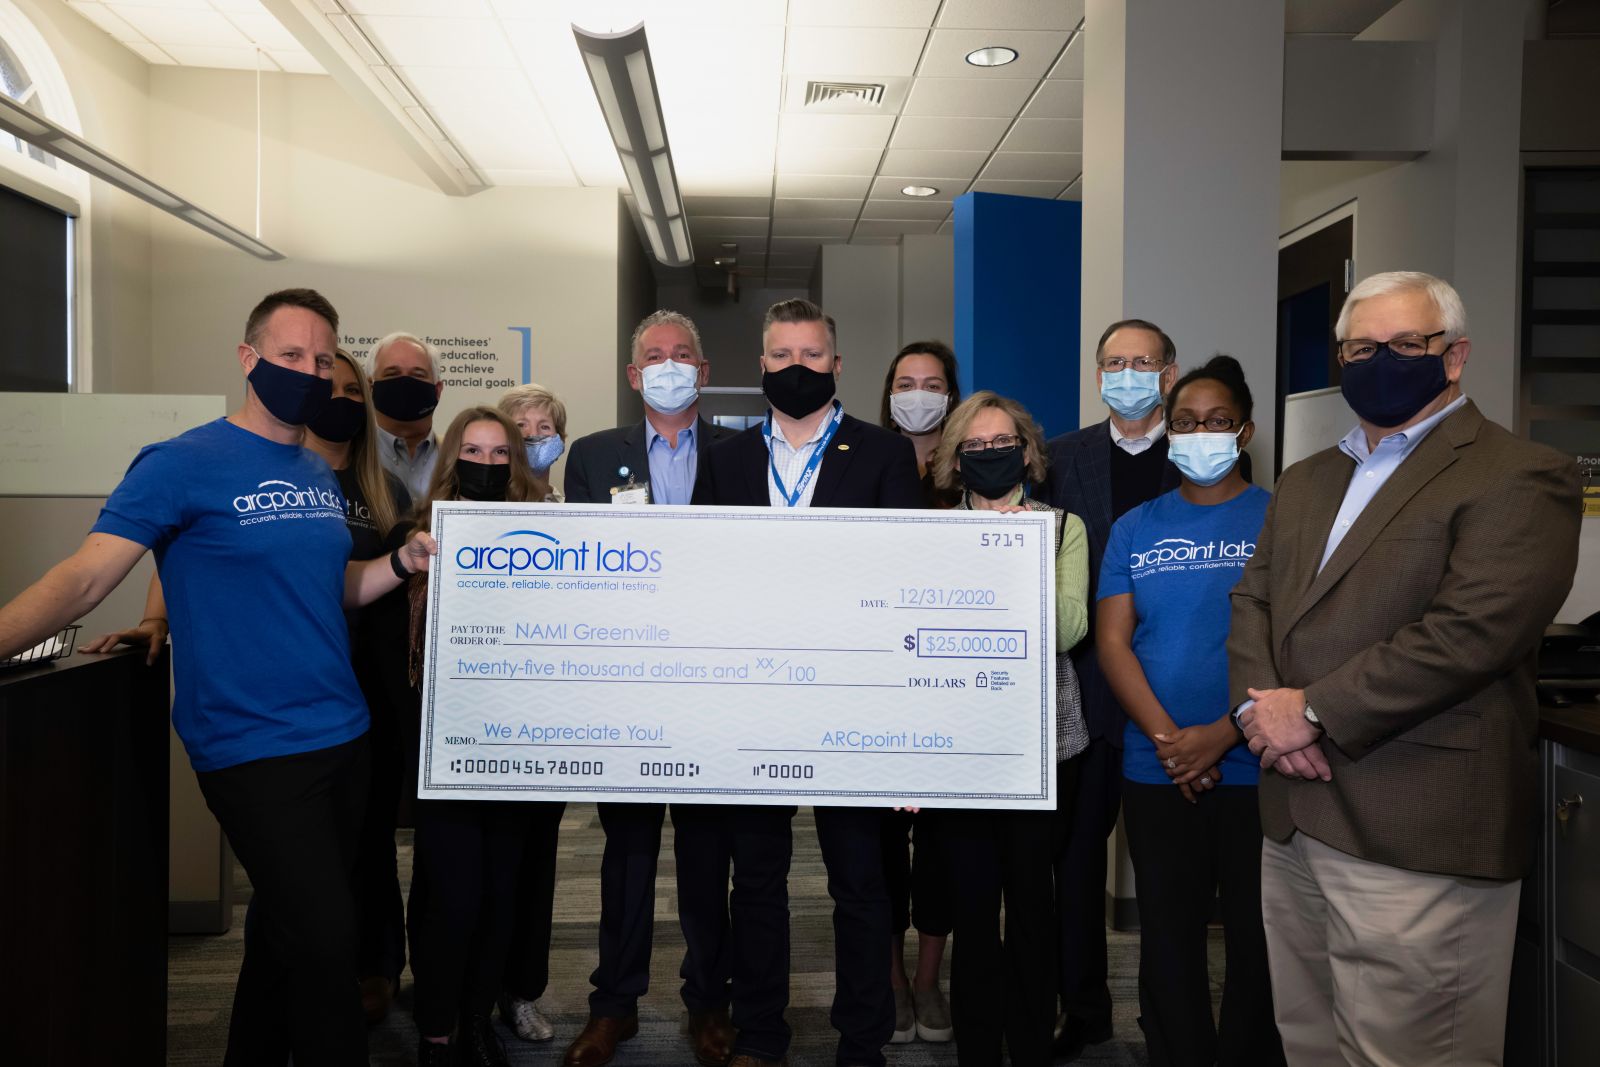 Representatives from ARCpoint Labs and NAMI Greenville met on Dec. 31 for the $25,000 check presentation (Photo/Provided)